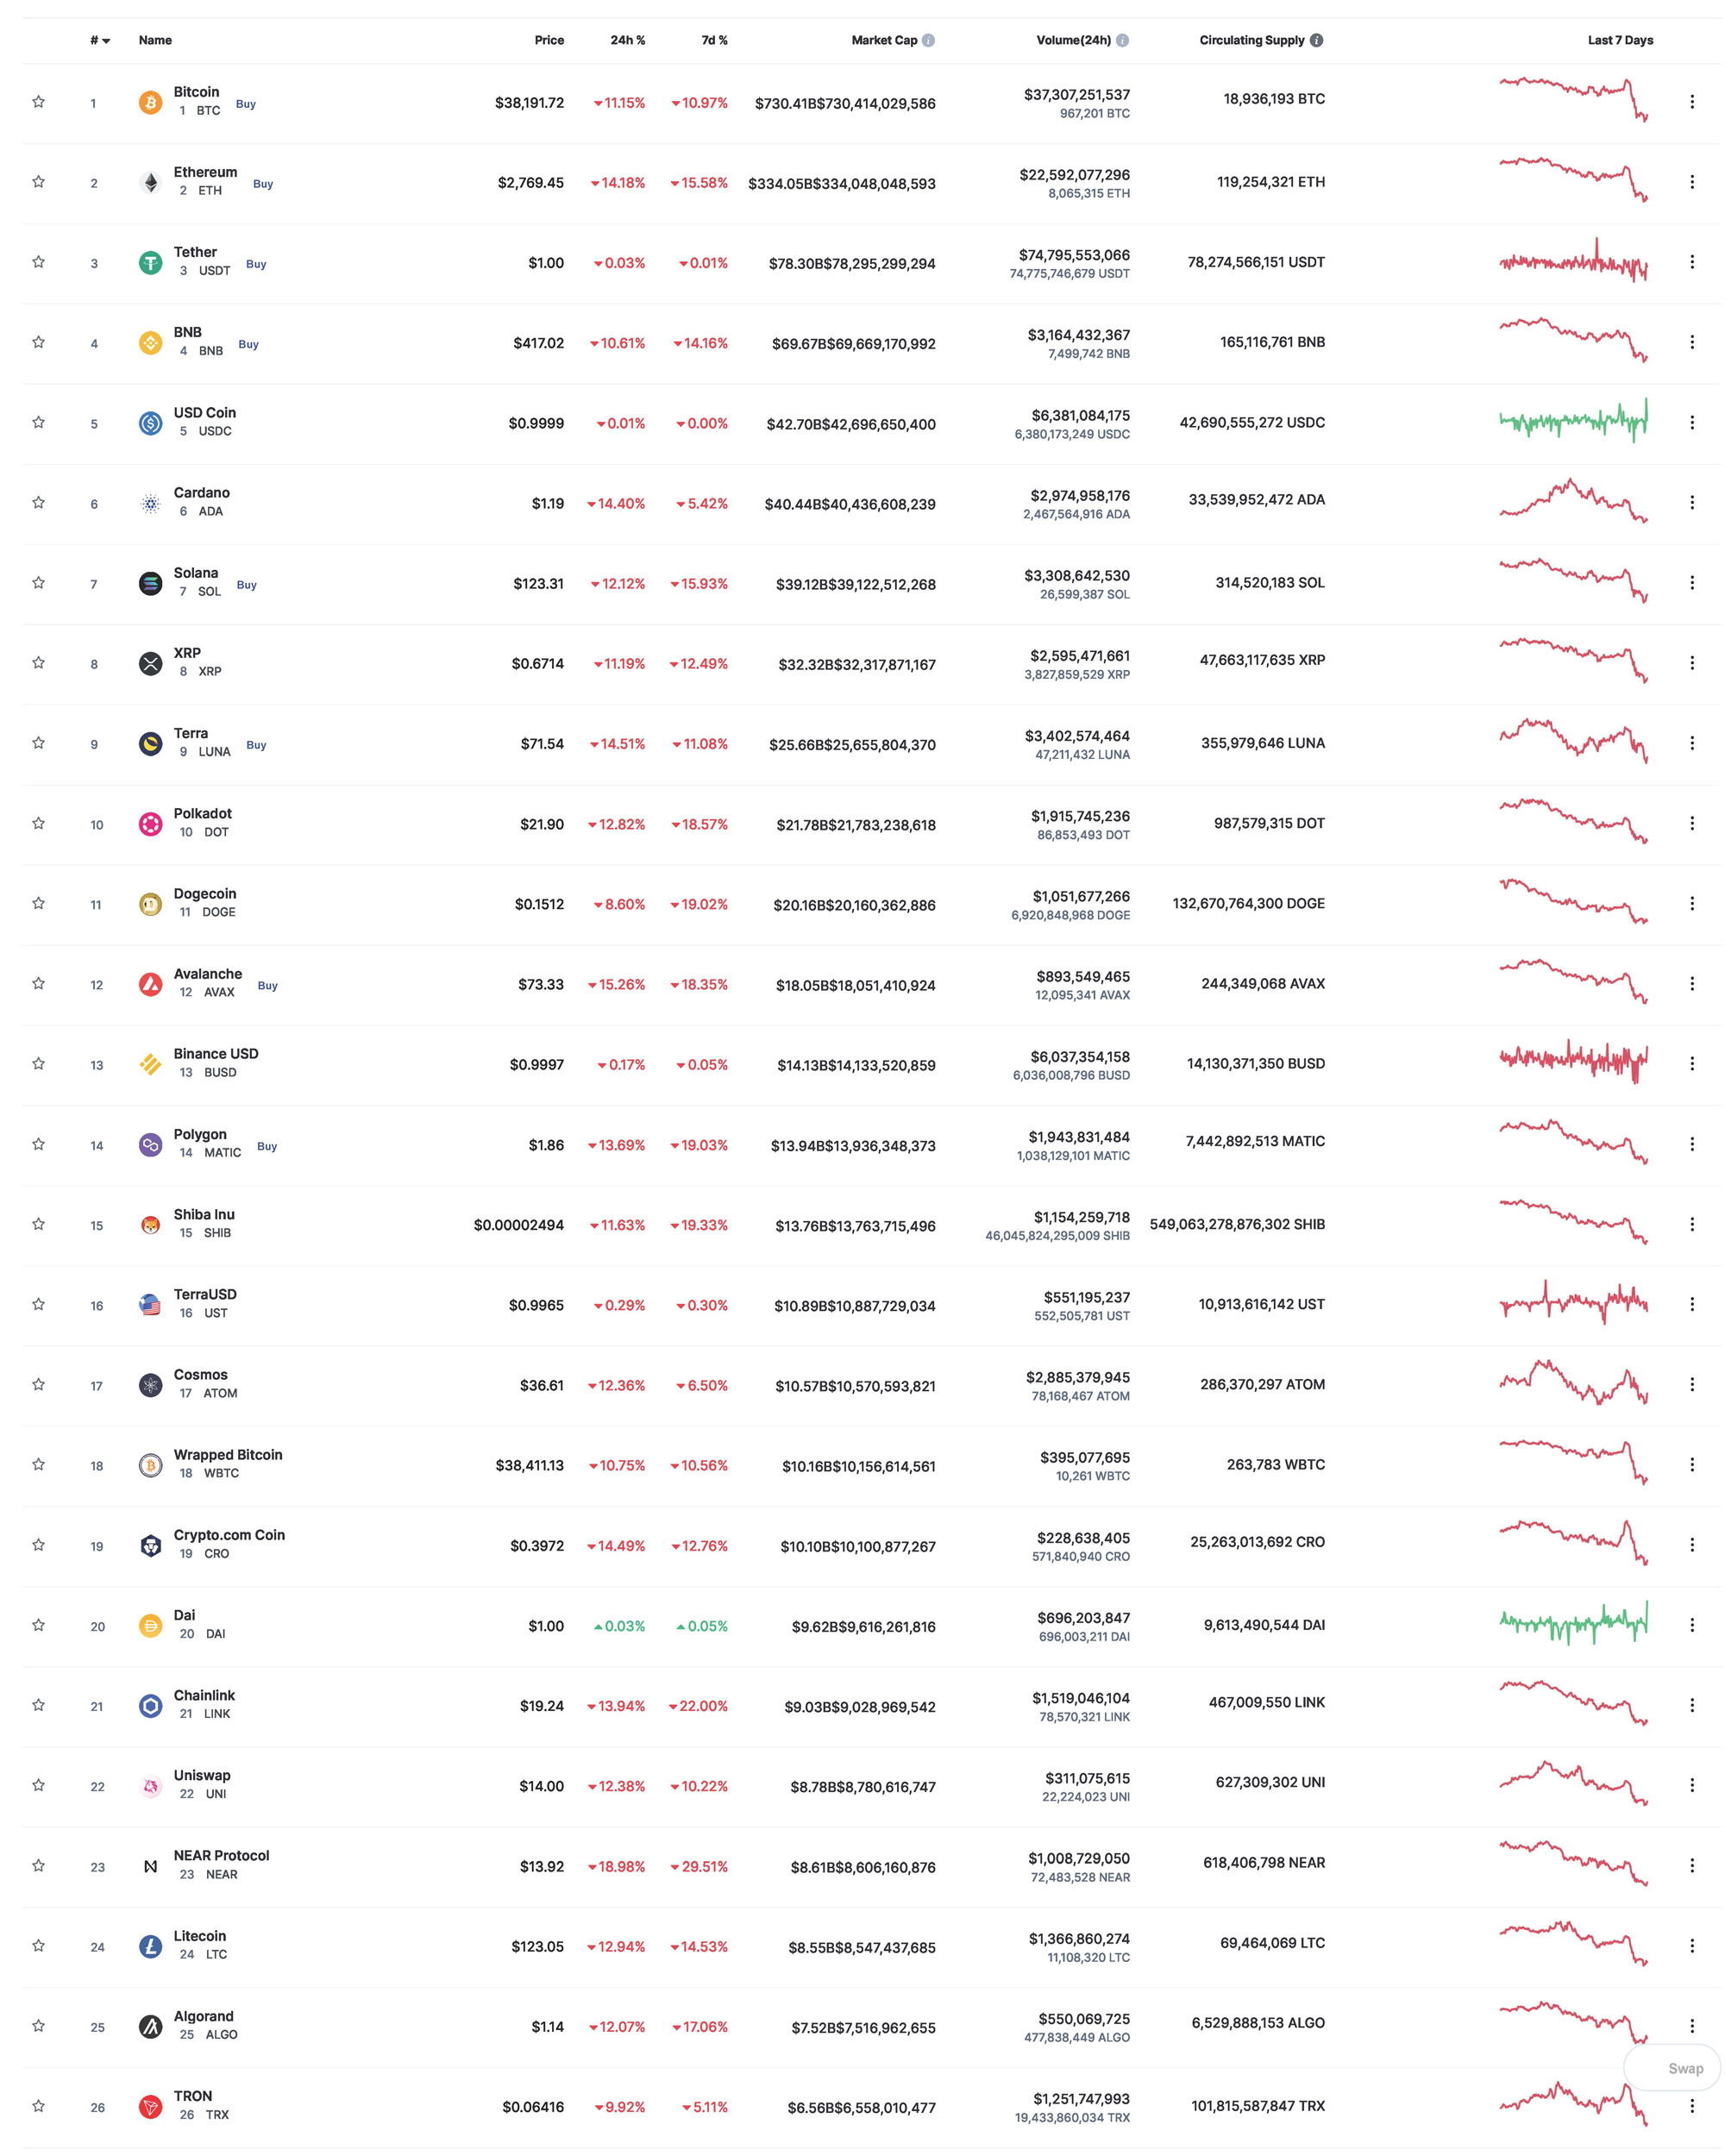 crypto currencies sorted by prominence